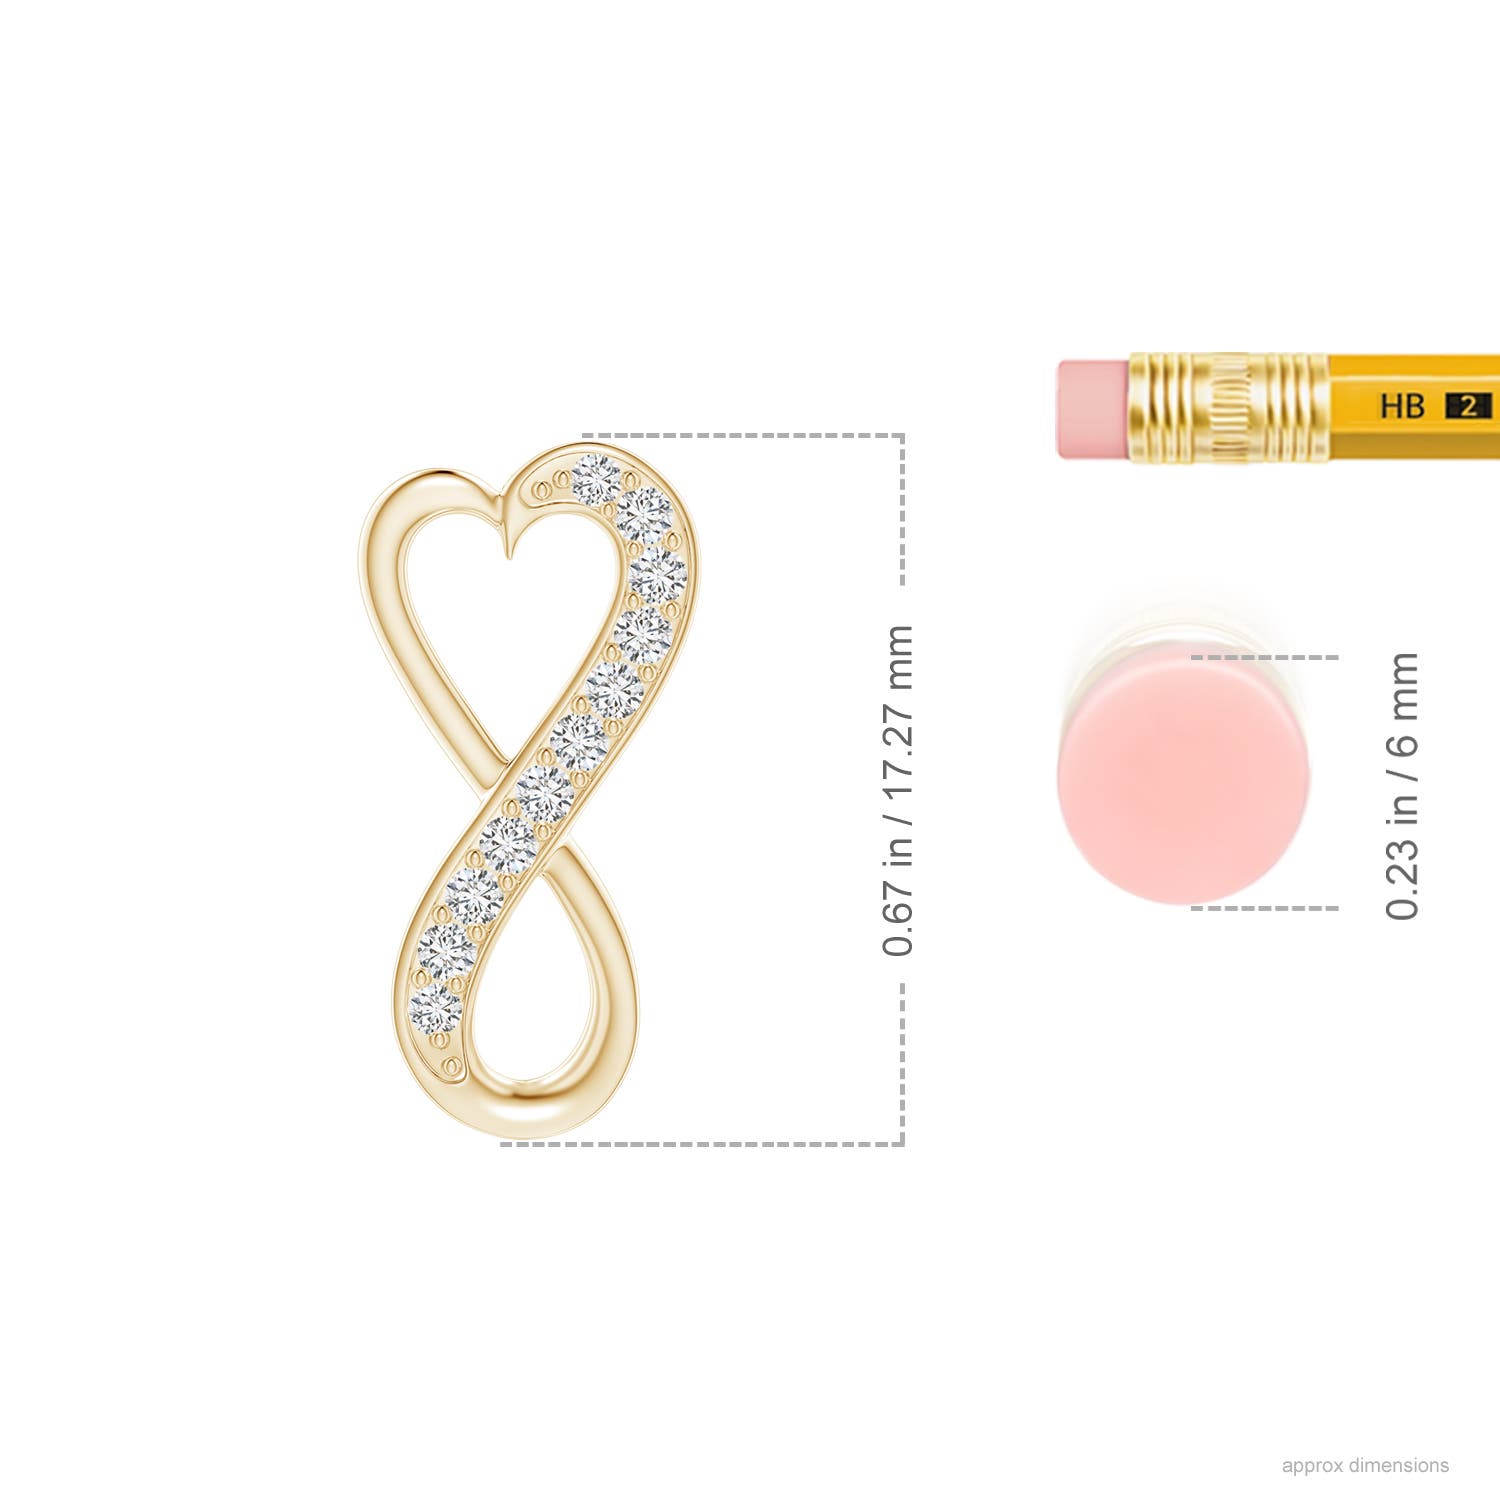 H, SI2 / 0.11 CT / 14 KT Yellow Gold